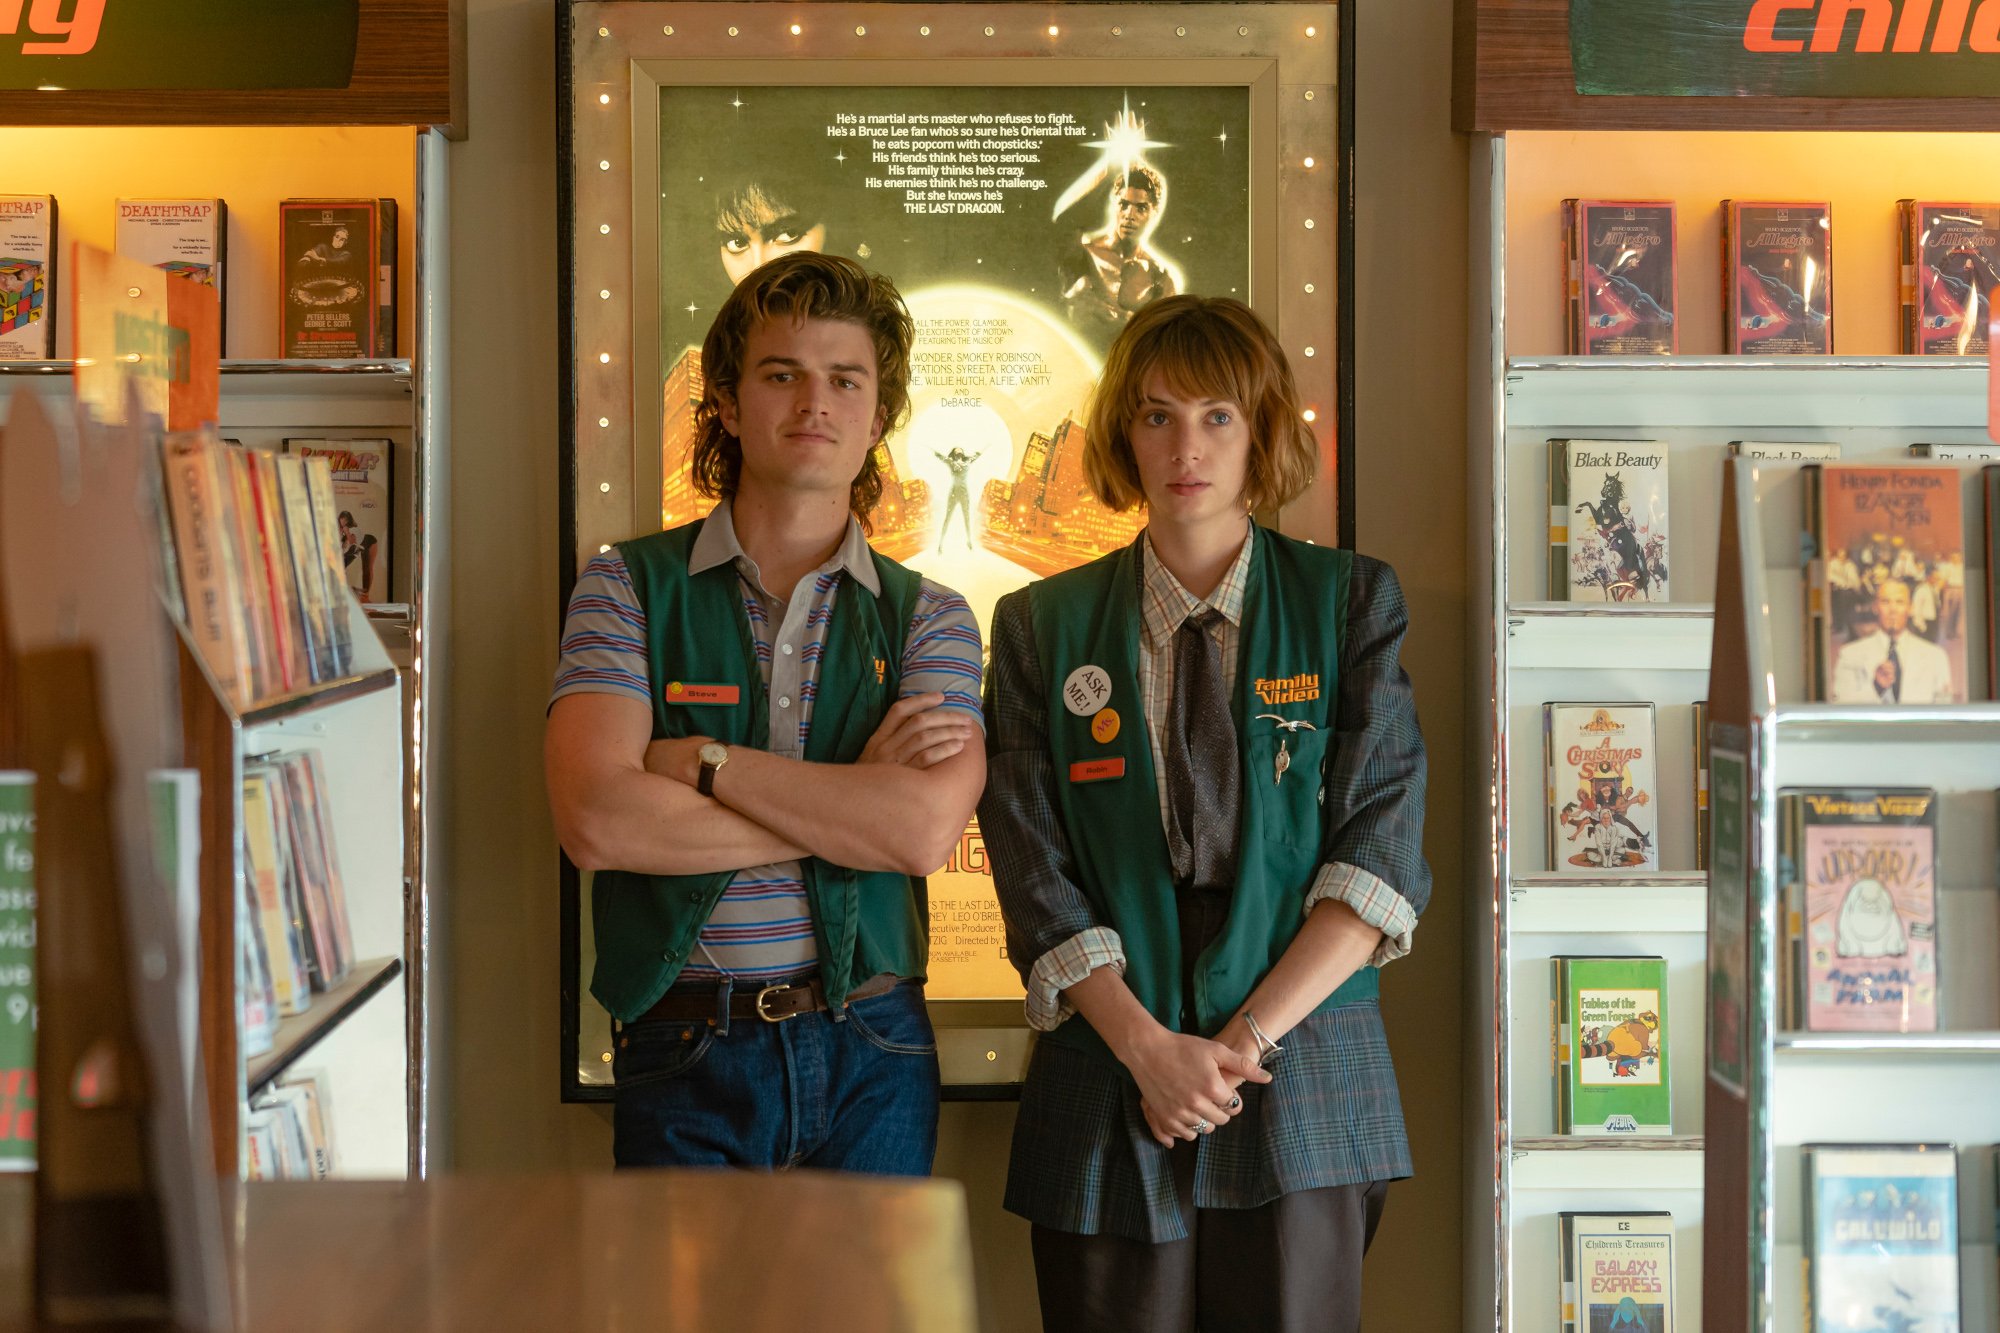 Joe Keery as Steve Harrington and Maya Hawke as Robin Buckley in 'Stranger Things,' which is among the TV shows and movies to watch over the Fourth of July weekend. The pair is standing next to one another in a video store. They're both wearing green vests.